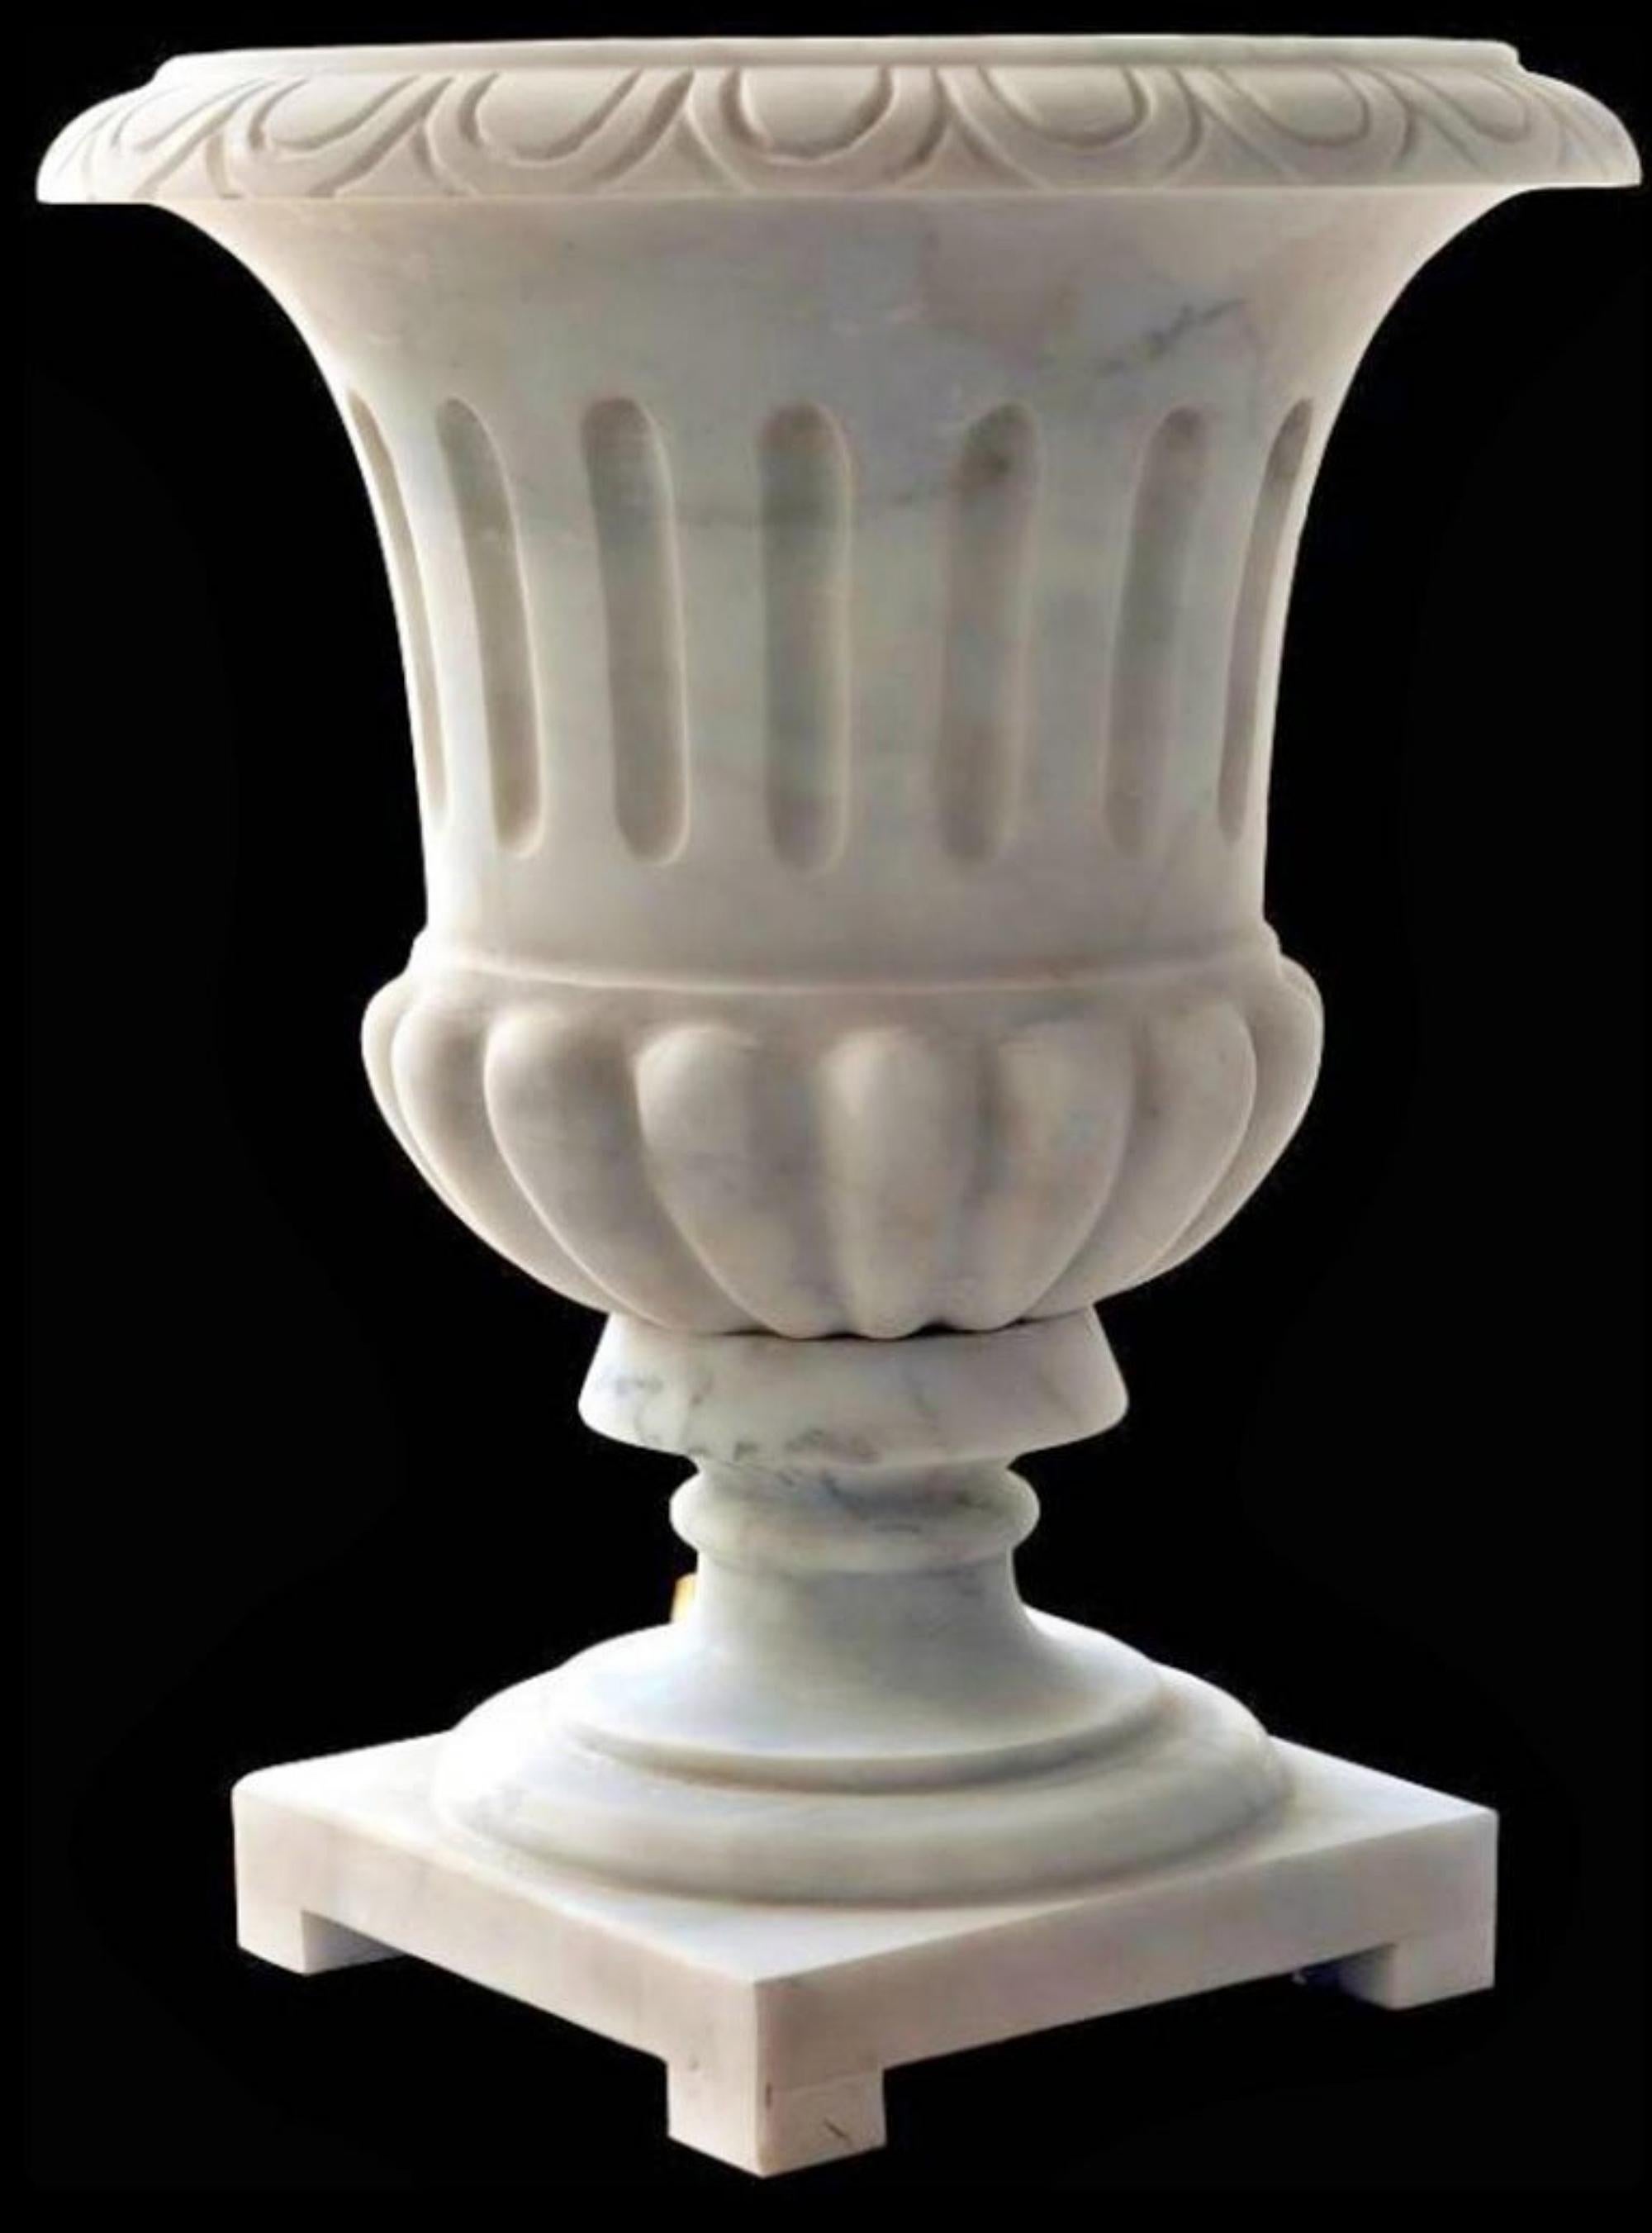 Vase in white Carrara marble early 20th century.
Italy
Handmade.
Measures: Height 50cm.
Weight 34kg.
Square base - side x side 30 x 30 cm.
Maximum diameter 40 cm.
Material white Carrara marble.
Very good condition.